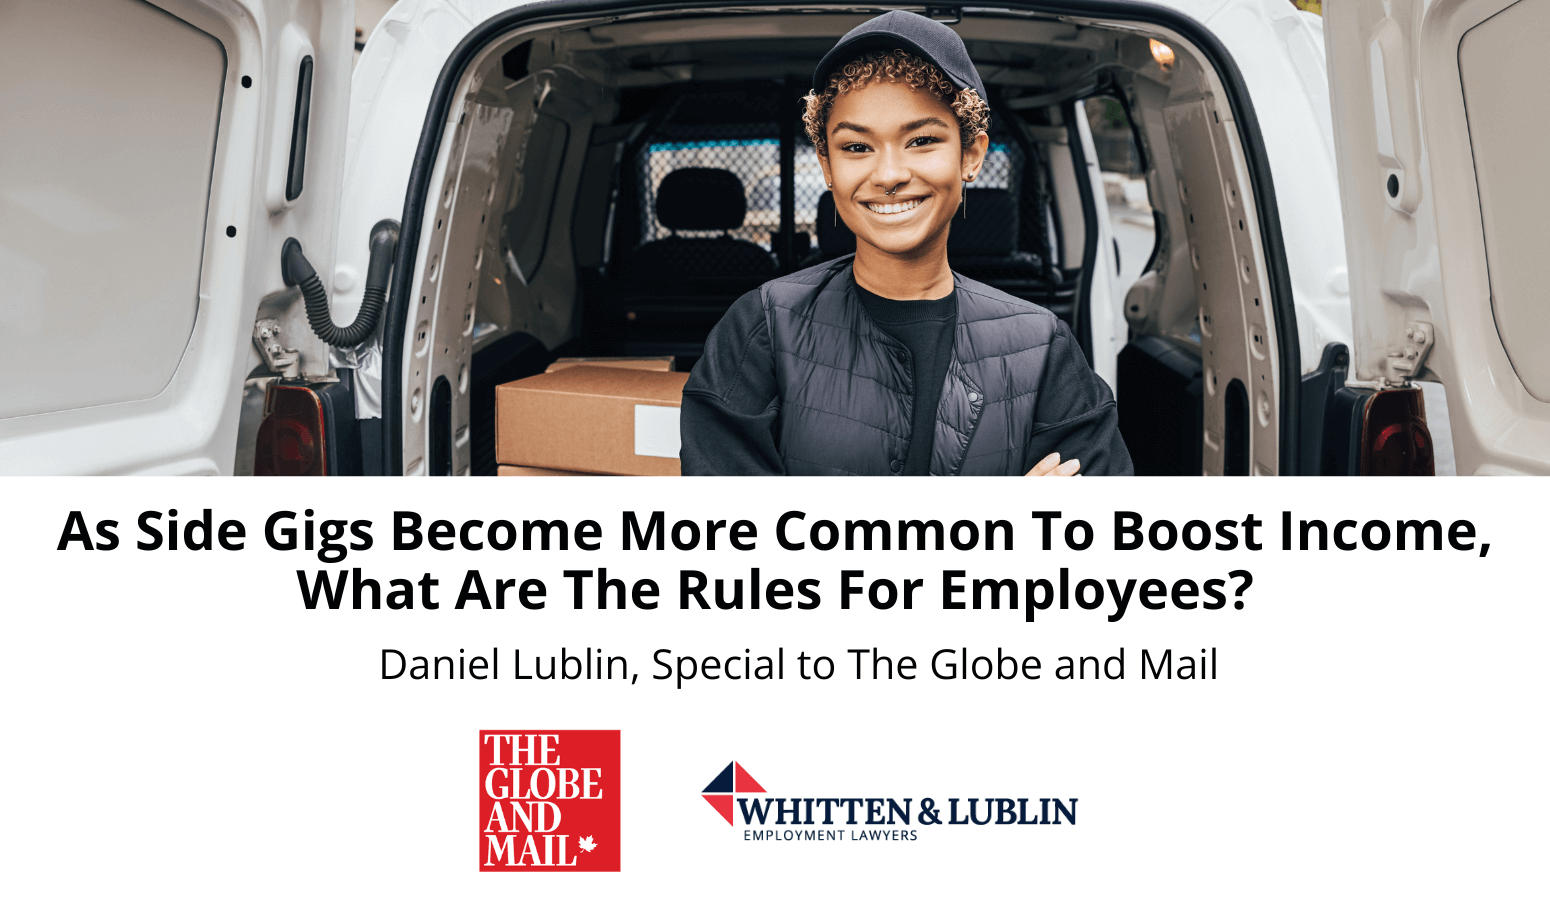 Featured image for “As Side Gigs Become More Common To Boost Income, What Are The Rules For Employees?”